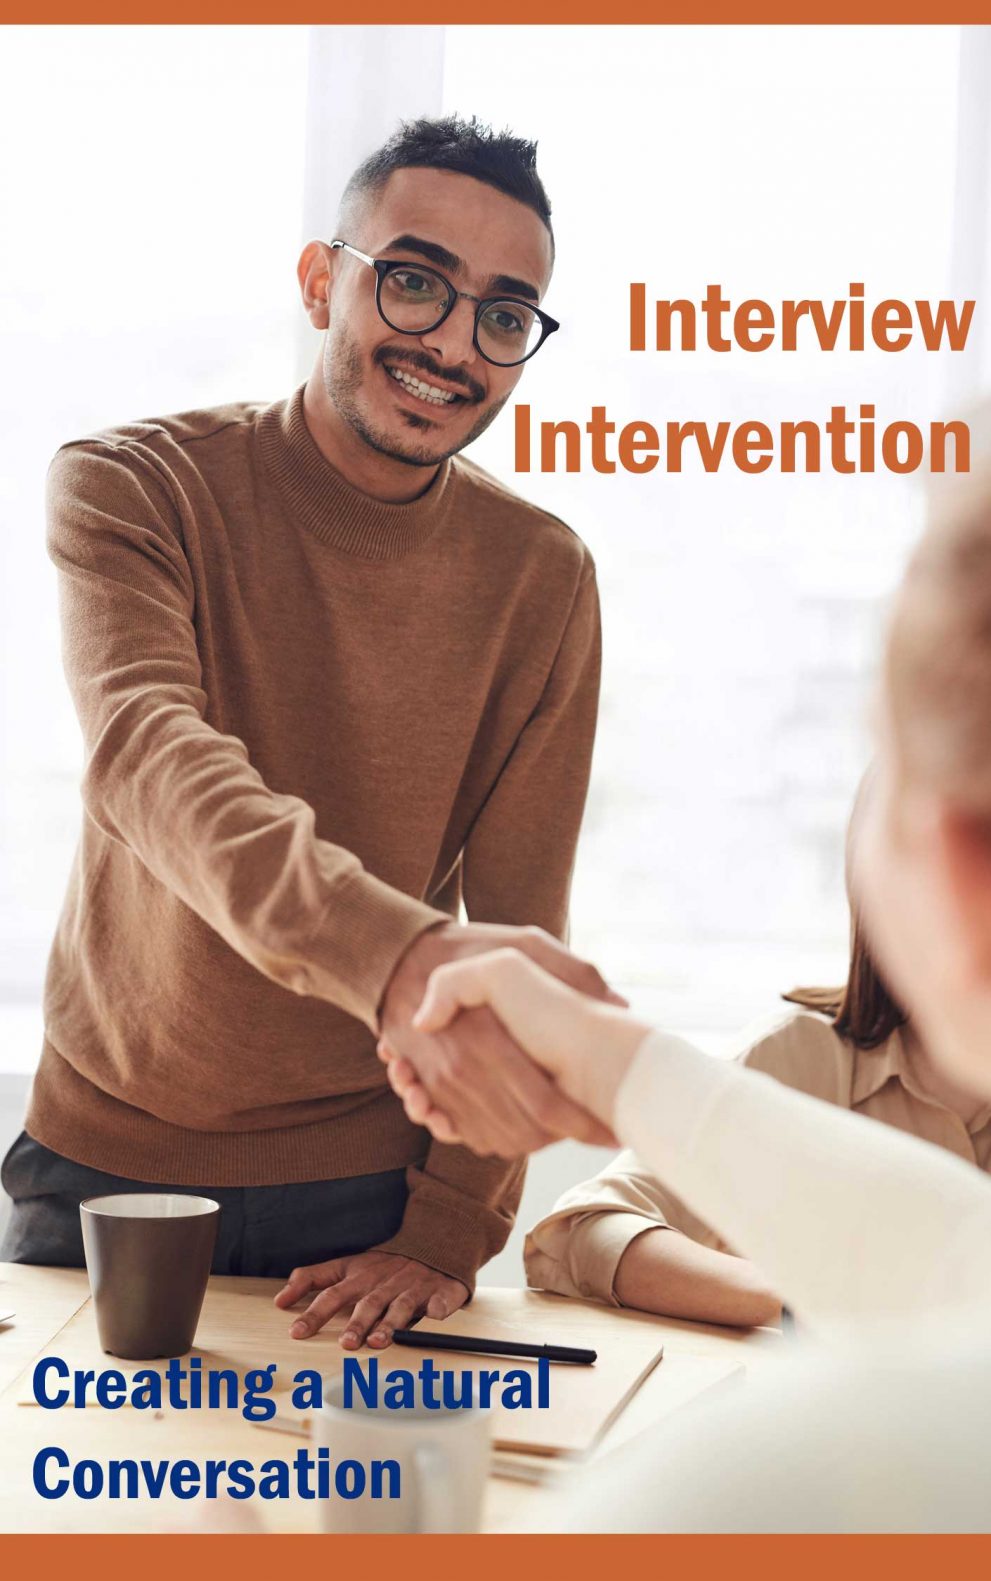 Transform the interview